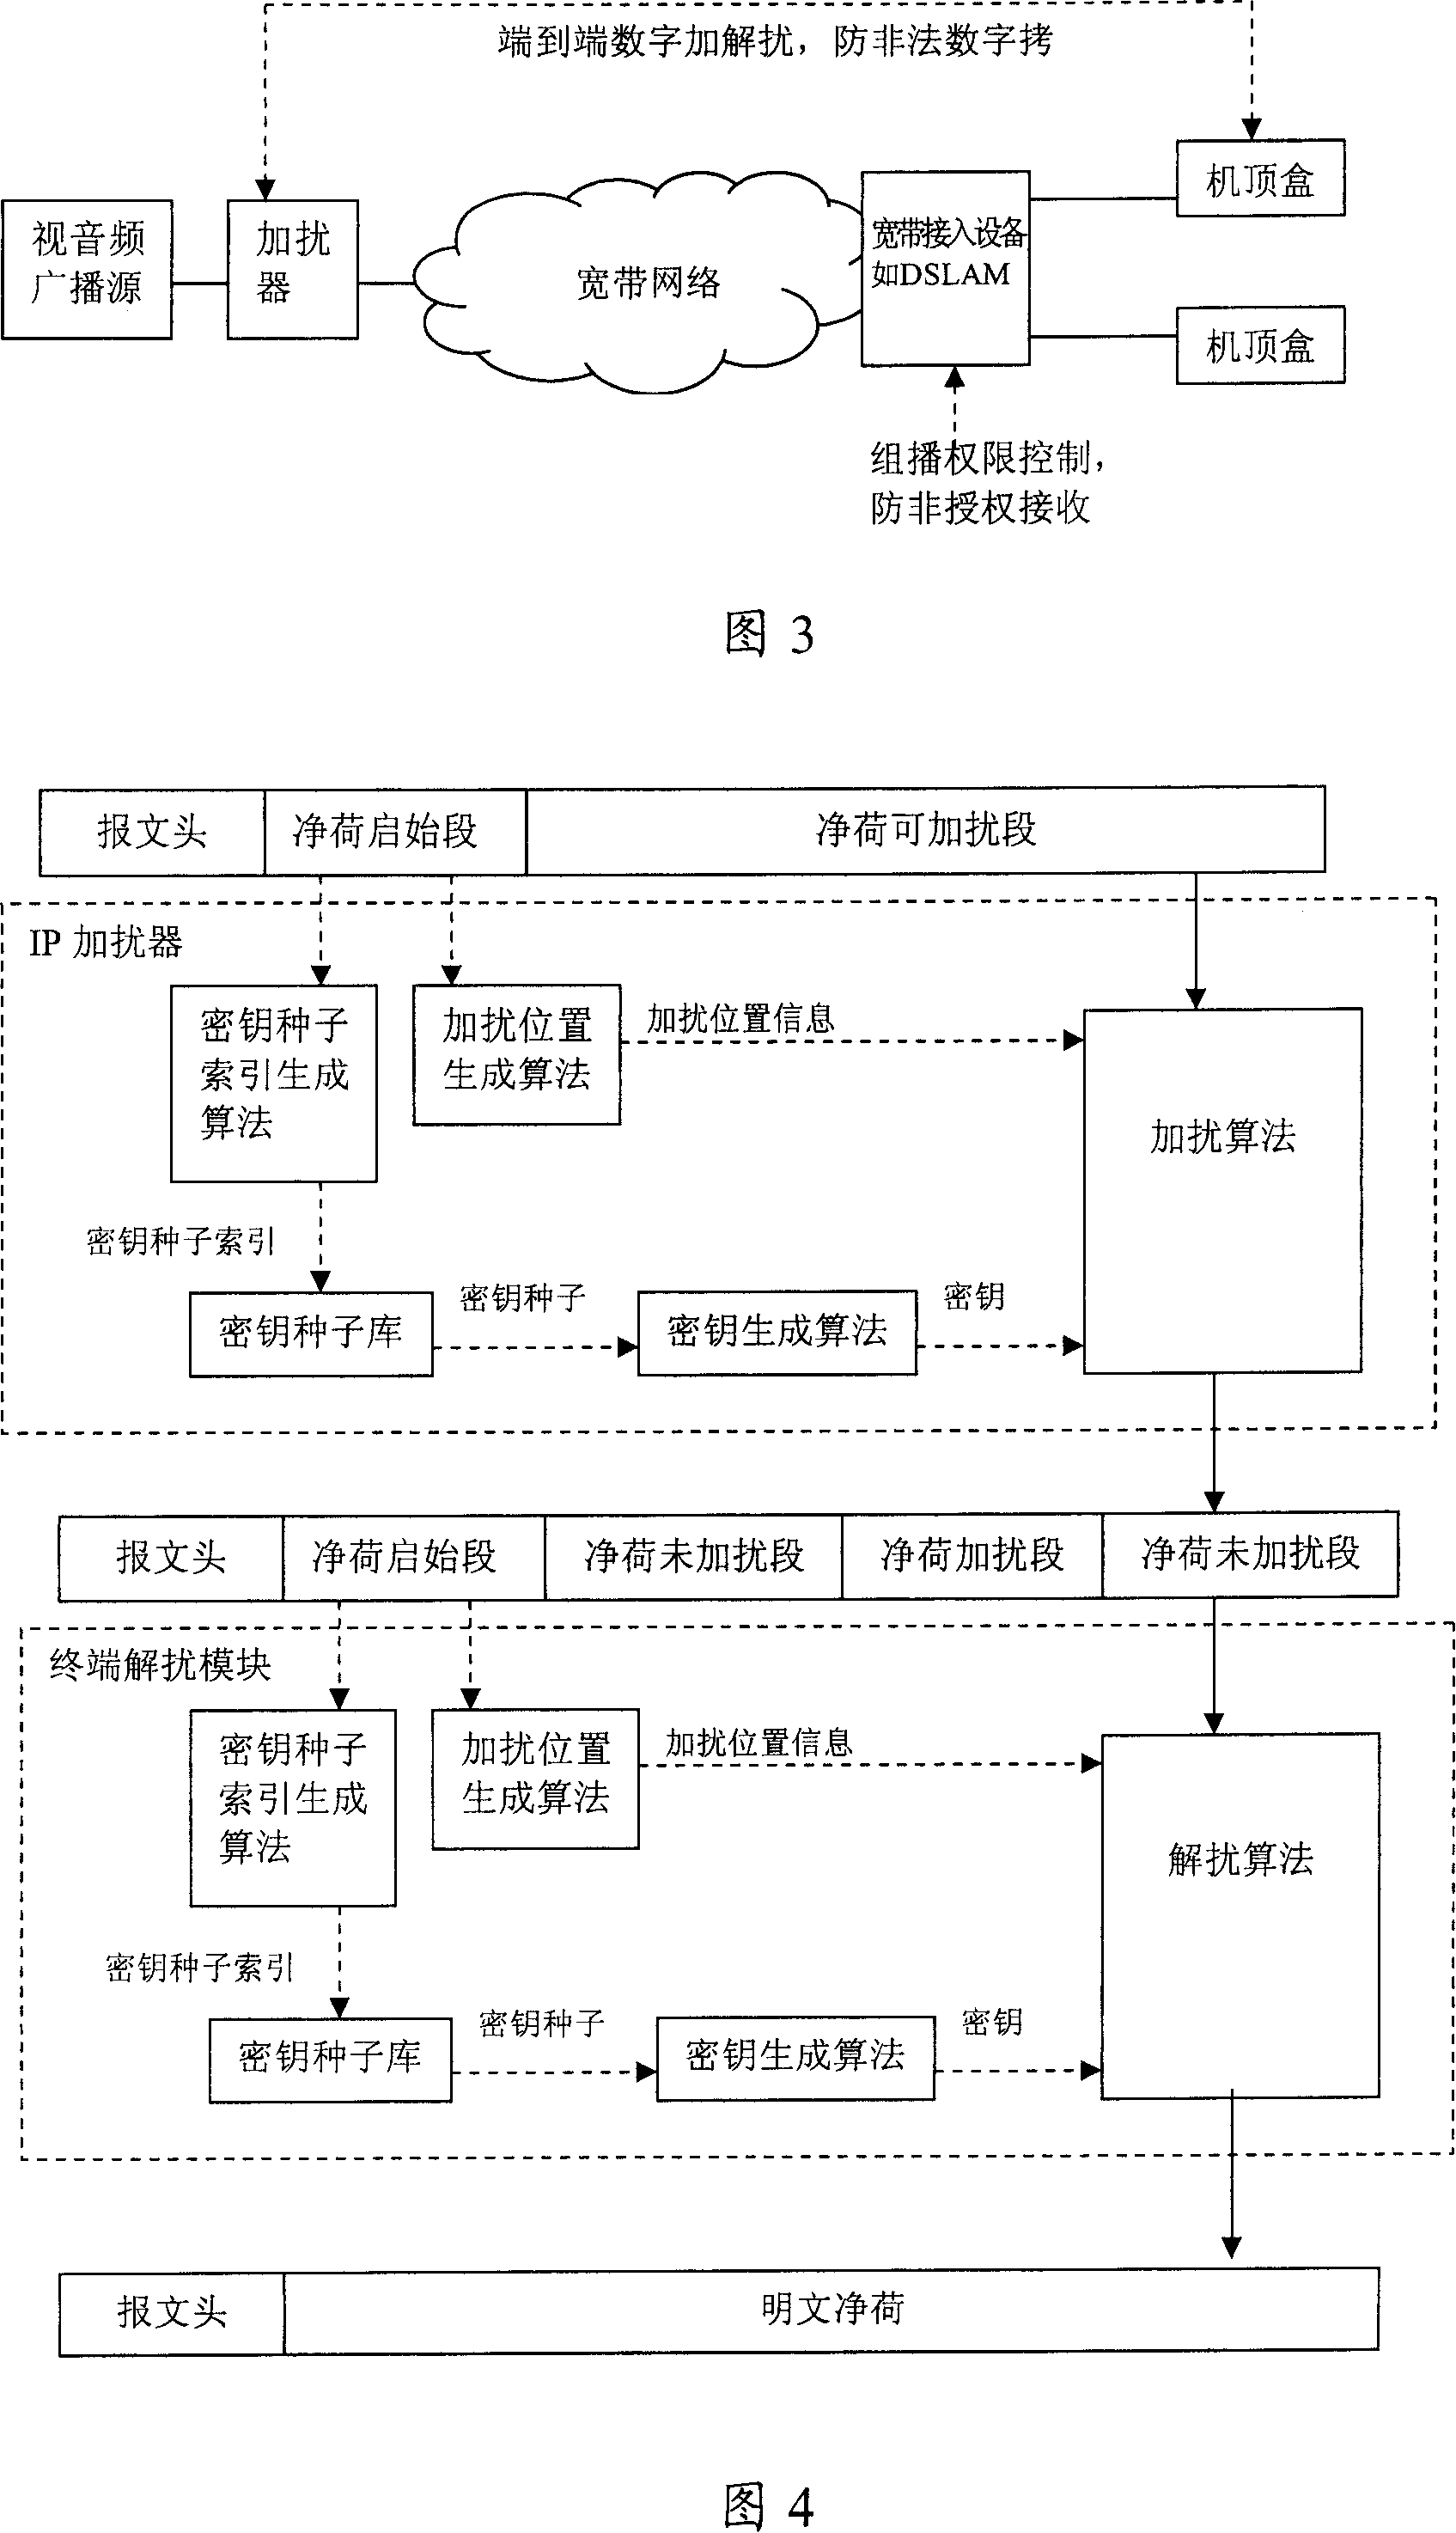 Method for protecting broadband video-audio broadcasting content